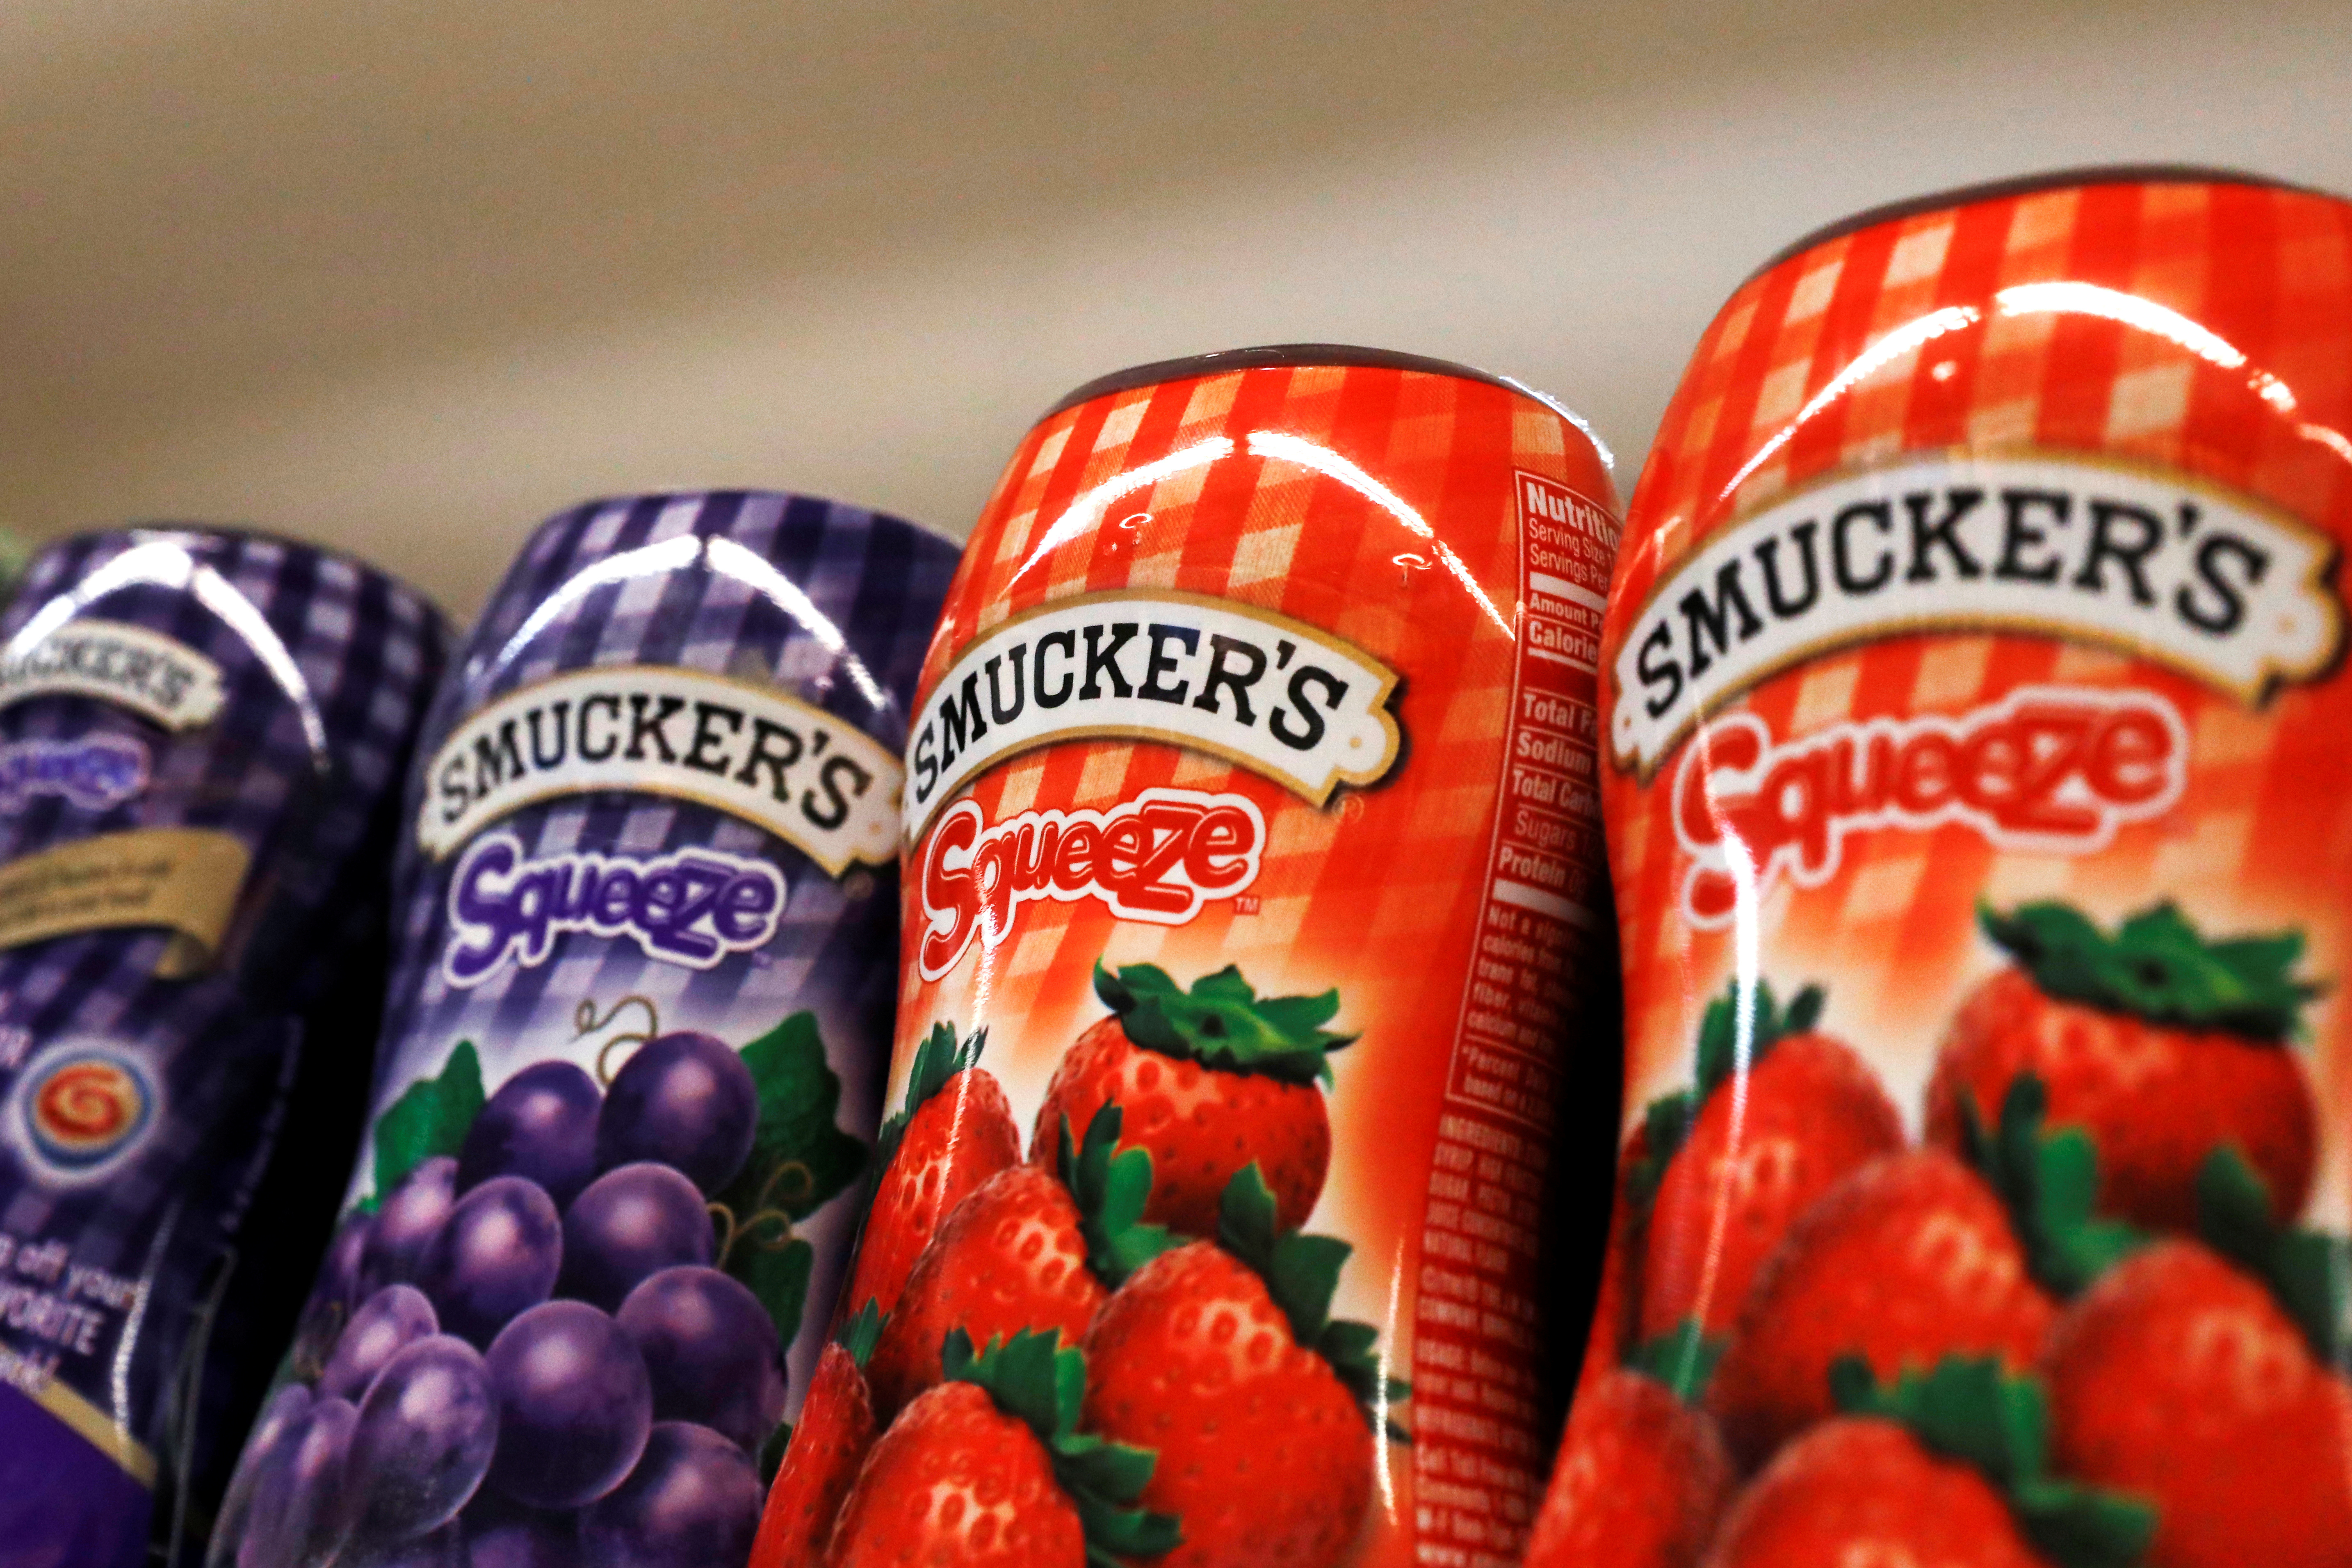 Containers of Smuckers's Jam are displayed in a supermarket in New York